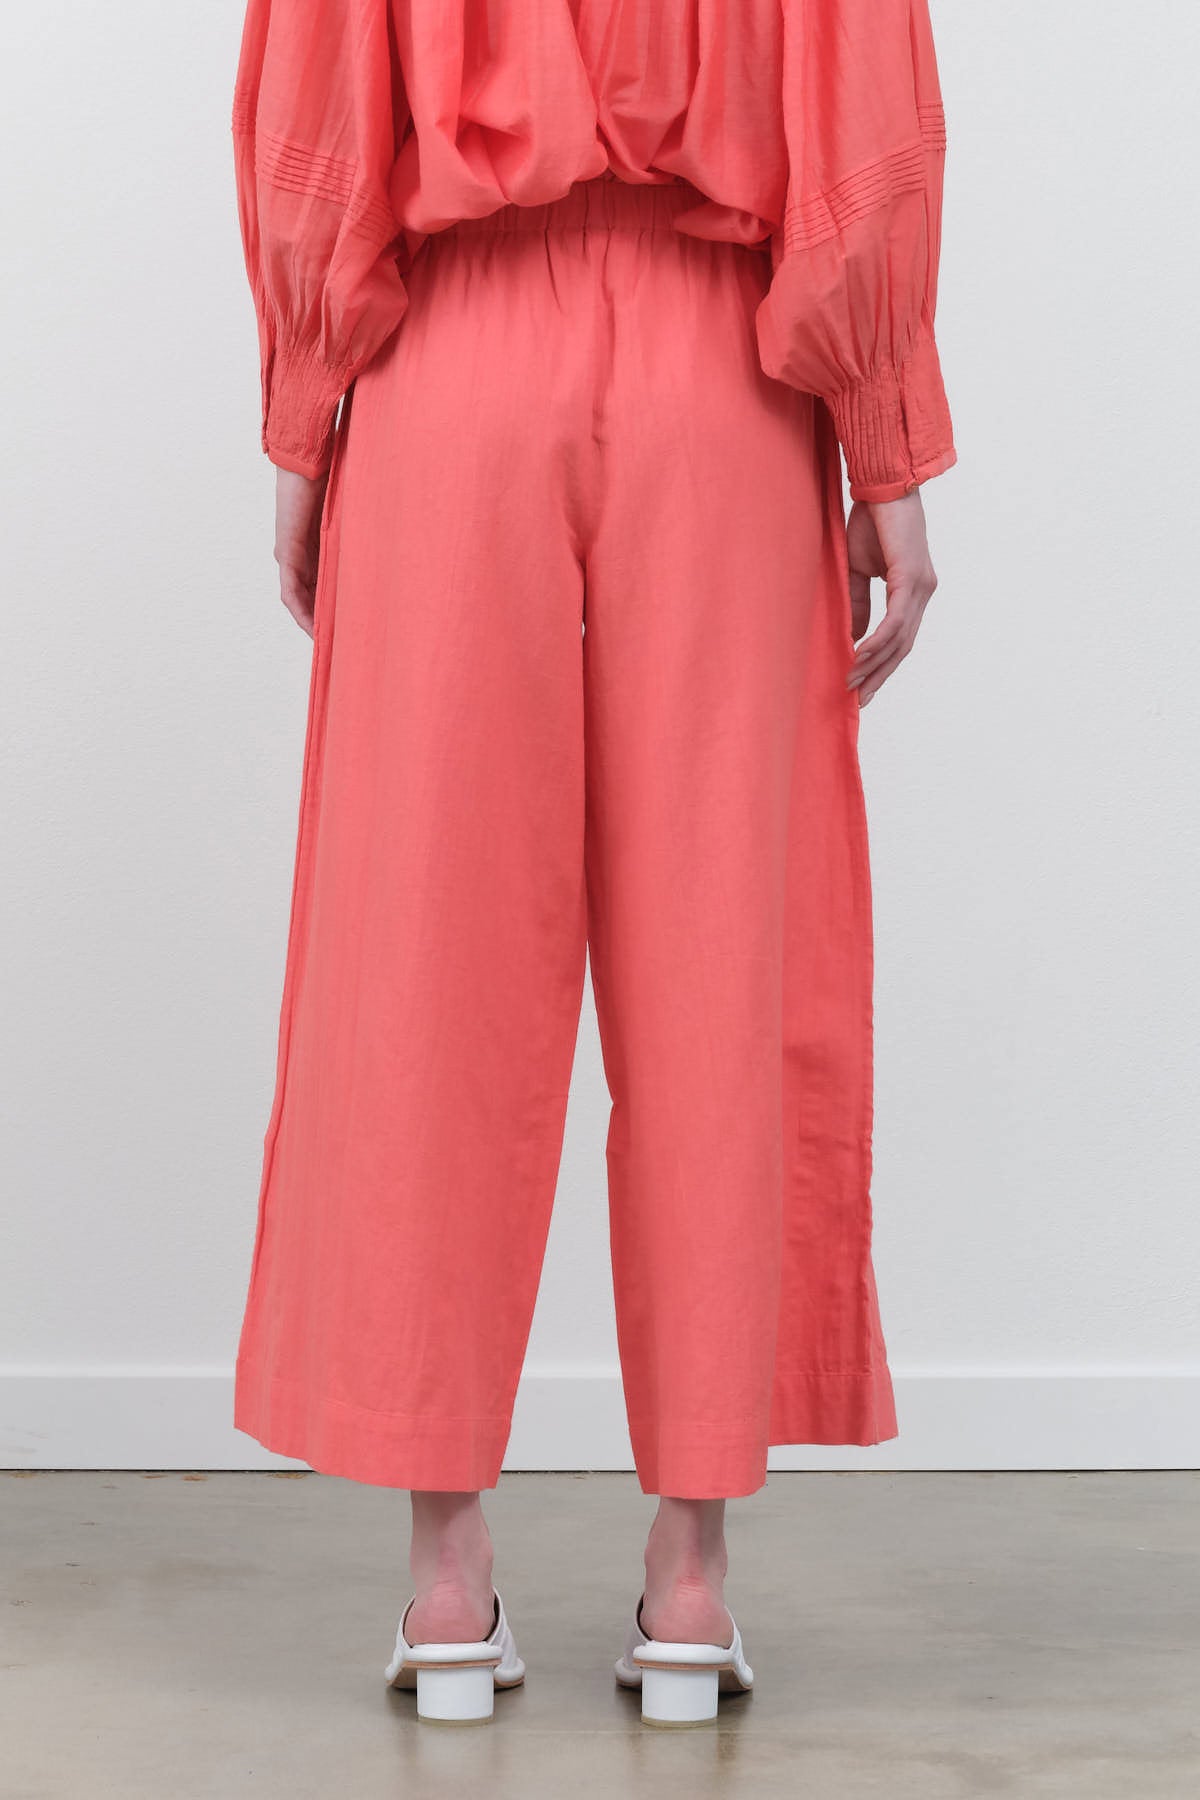 Back view of Mirth Pant in Coral